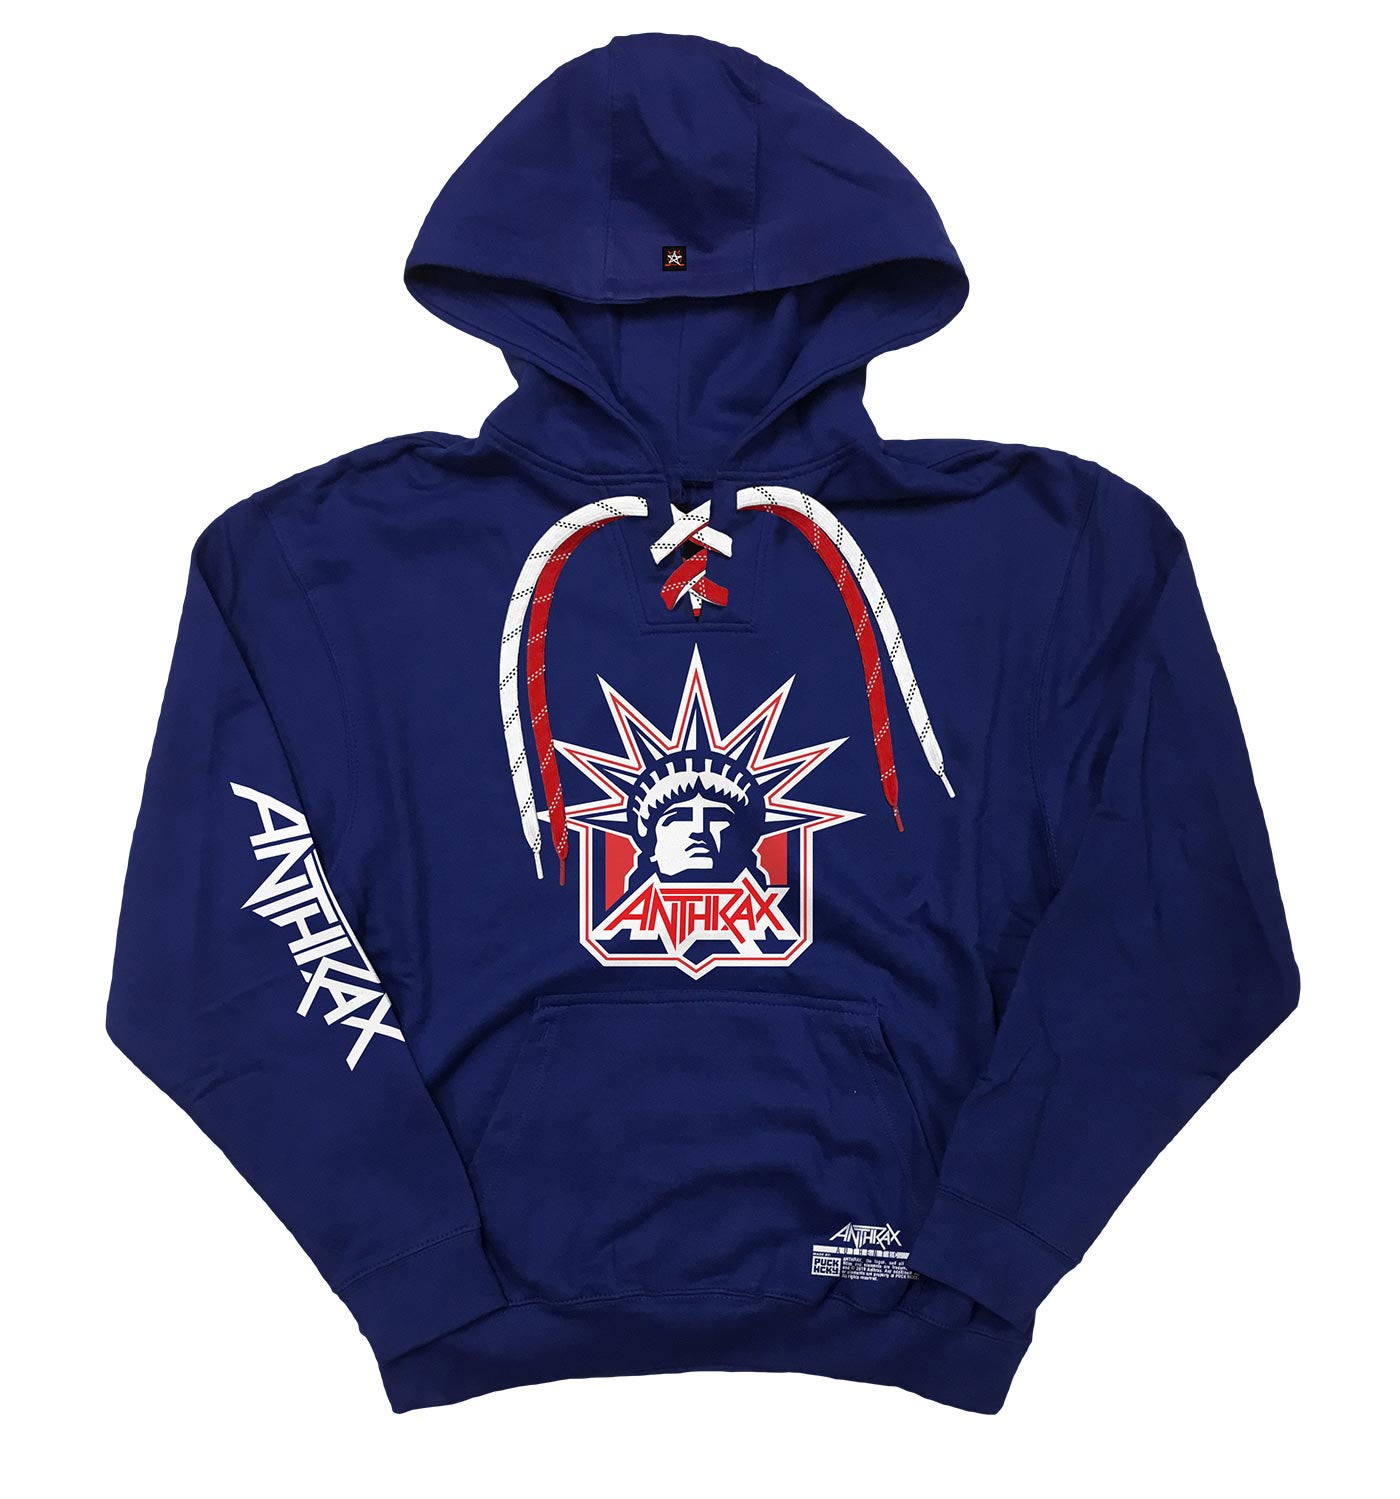 ANTHRAX 'LADY OF THRASH' laced pullover hockey hoodie in royal with red and white laces with black stripes